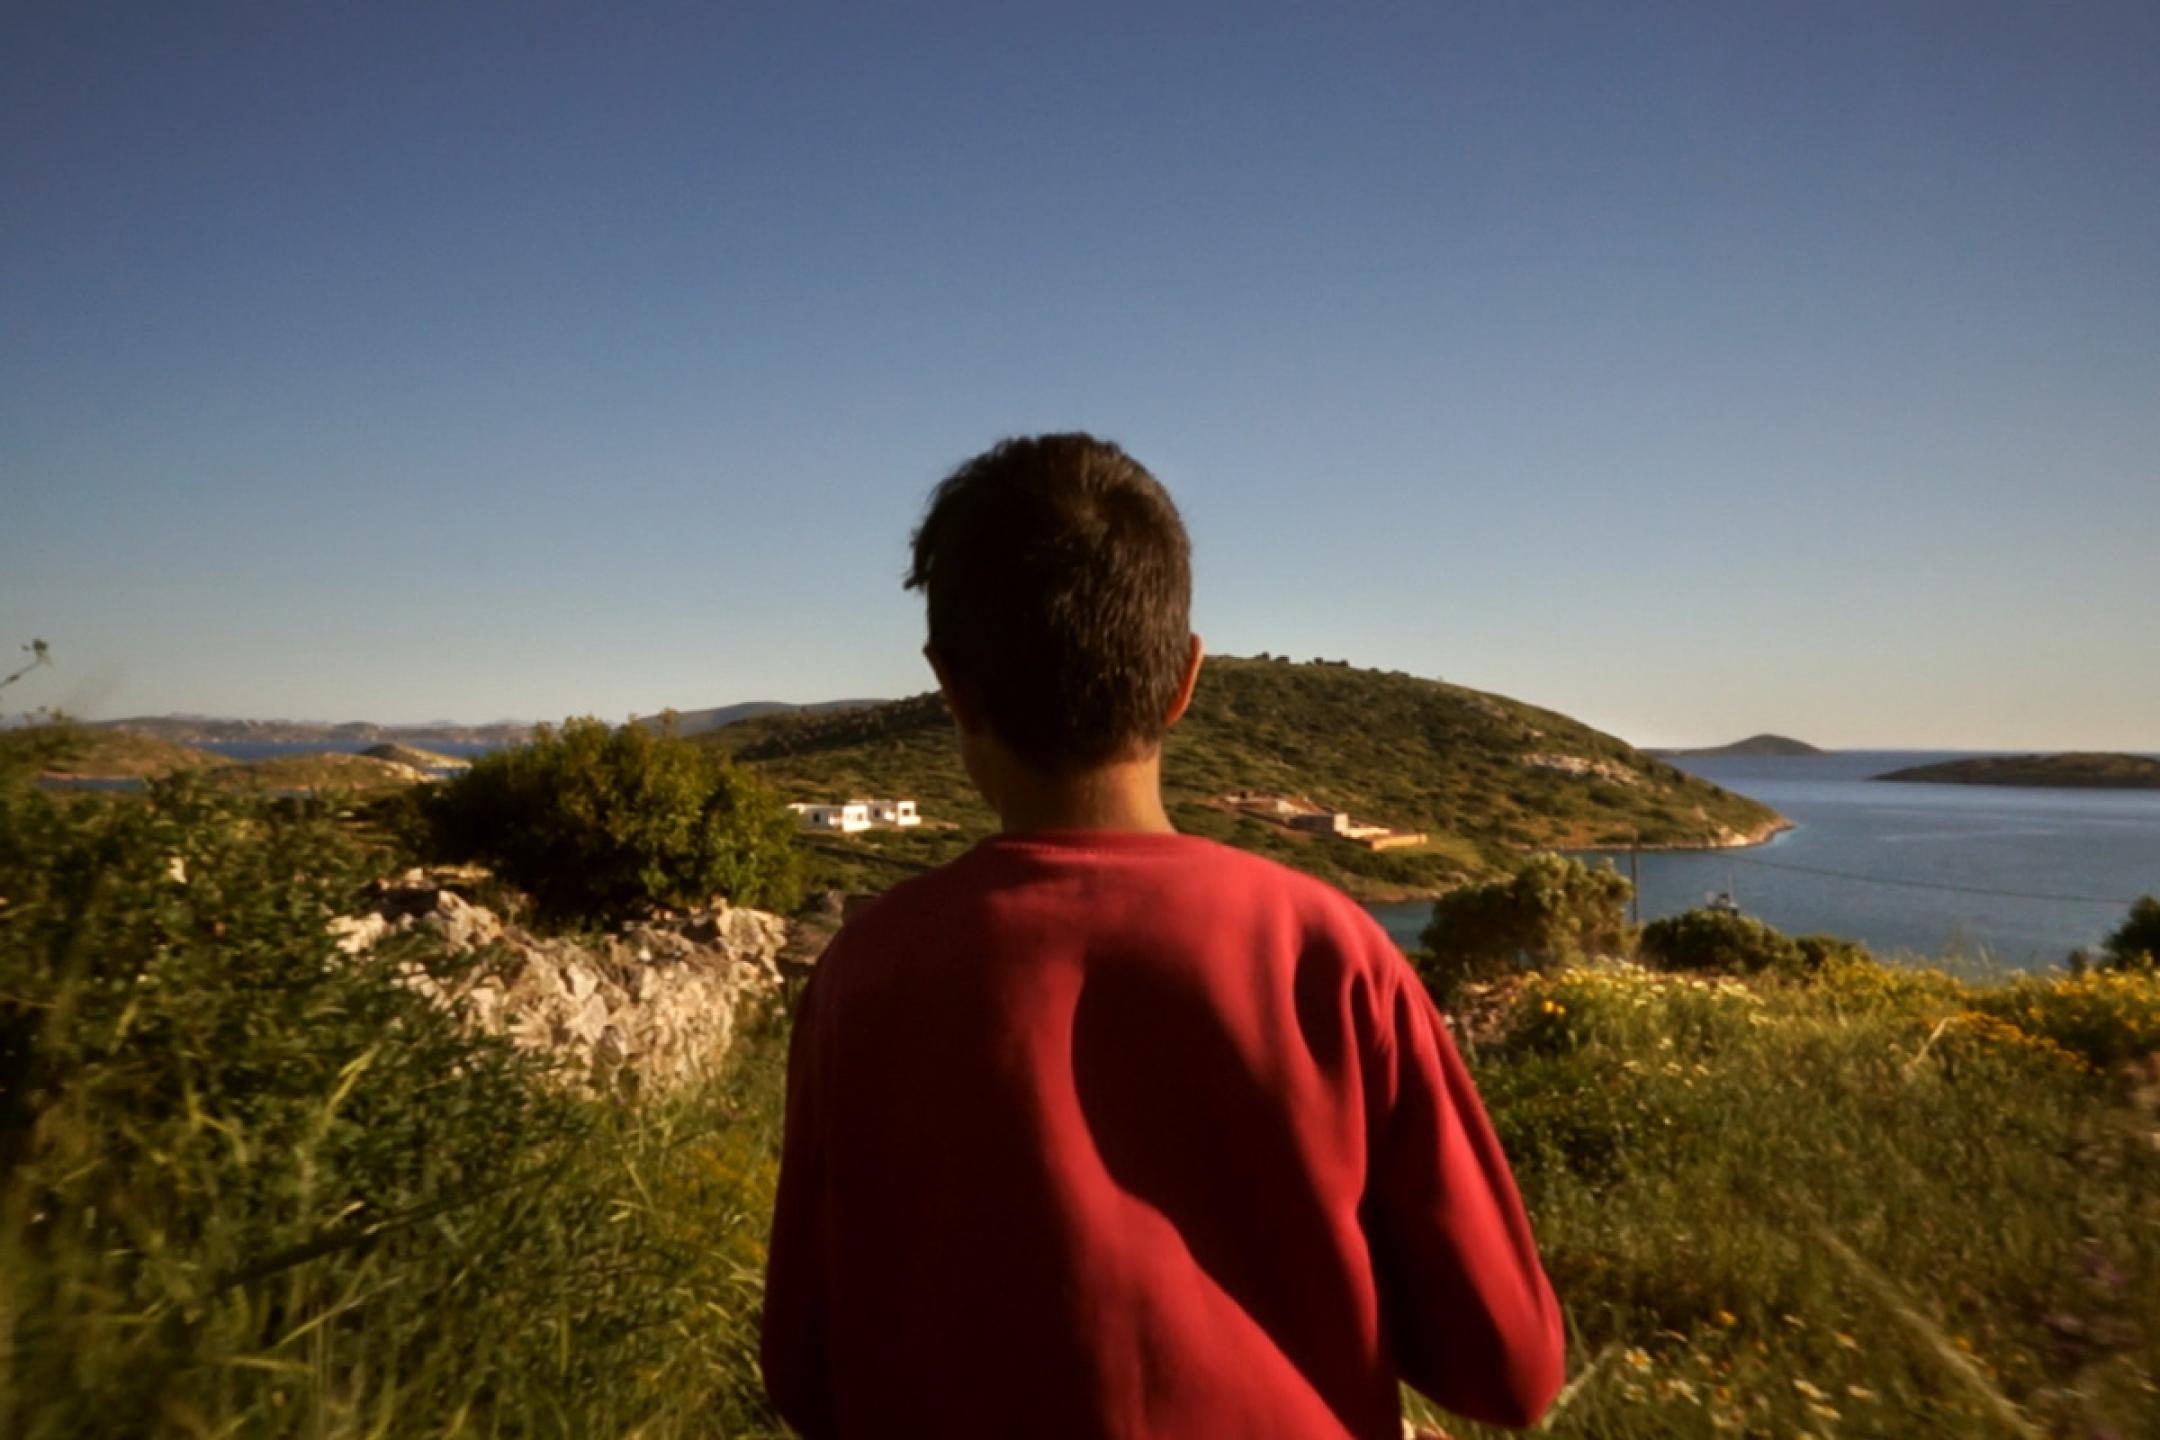 A boy in a red shirt stands on top of a hill and overlooks the coastline of a small mediterranean island.